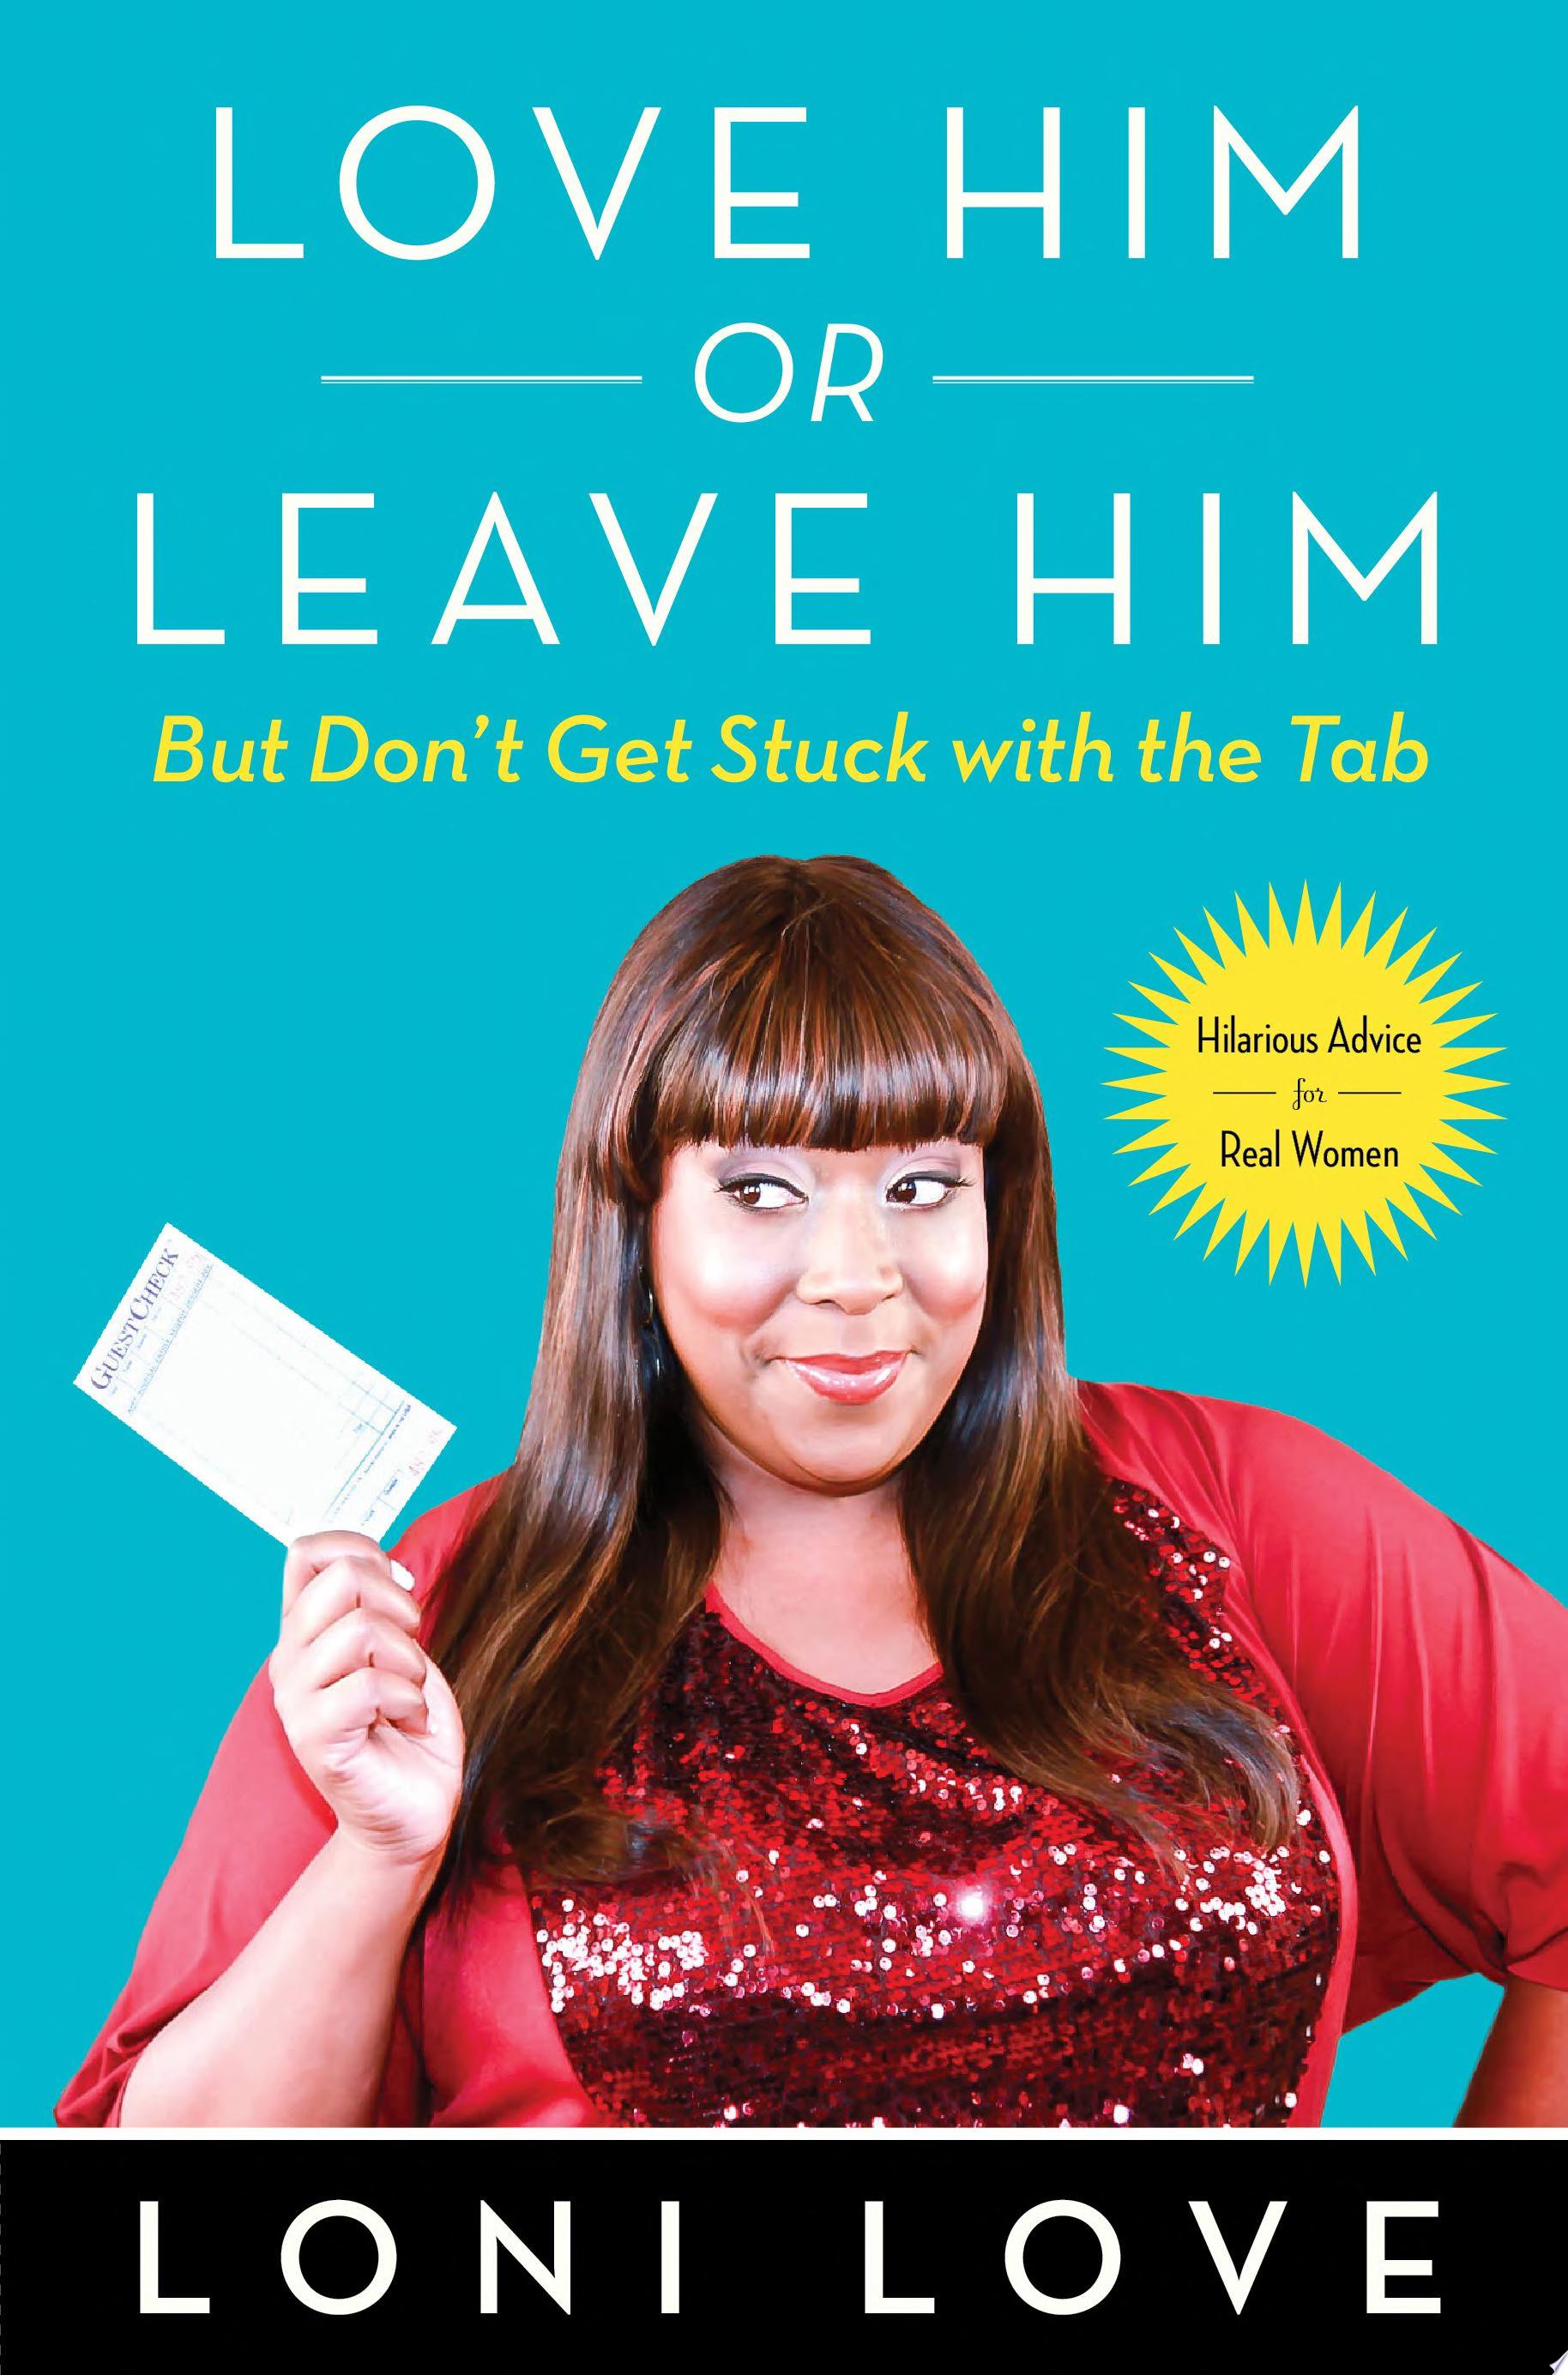 Image for "Love Him Or Leave Him, But Don't Get Stuck With the Tab"